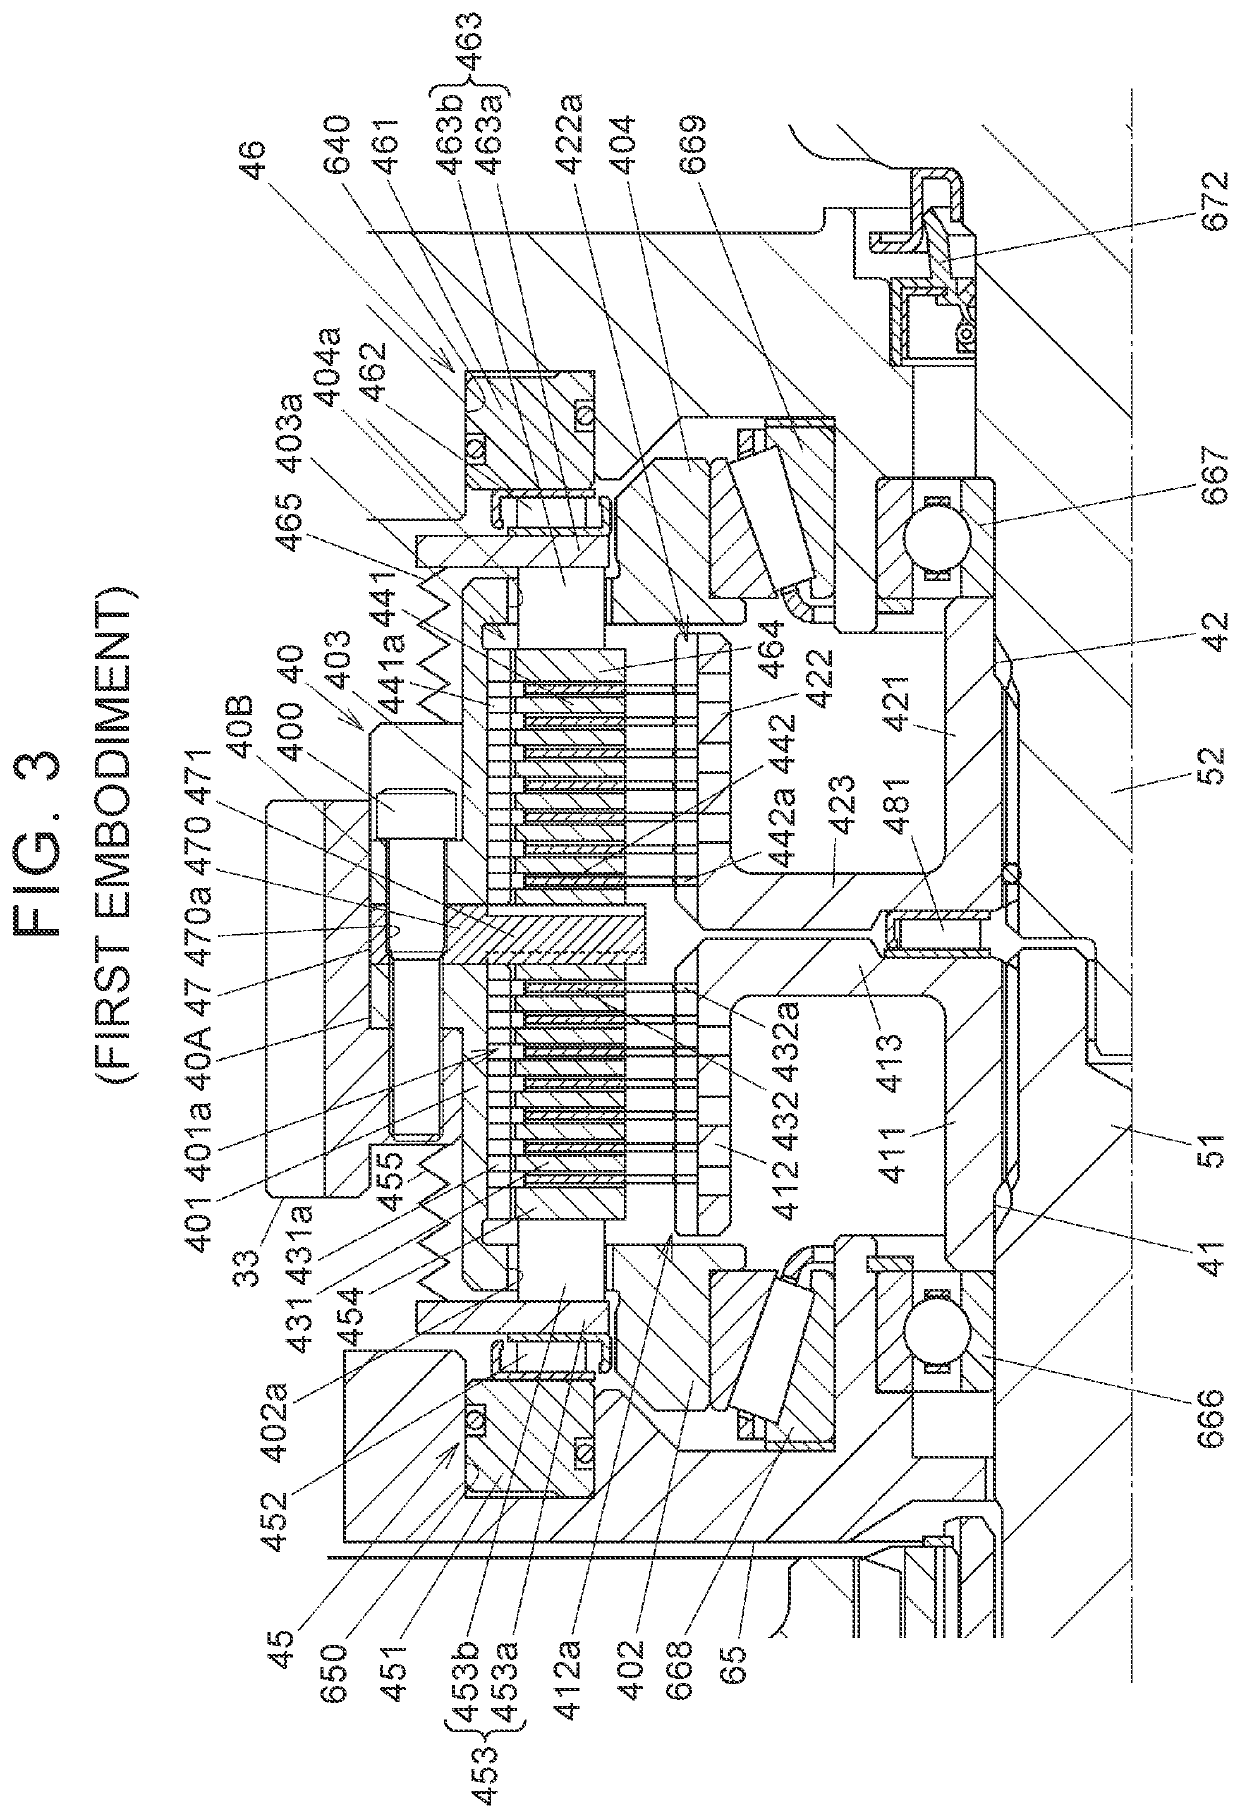 Driving force distribution device